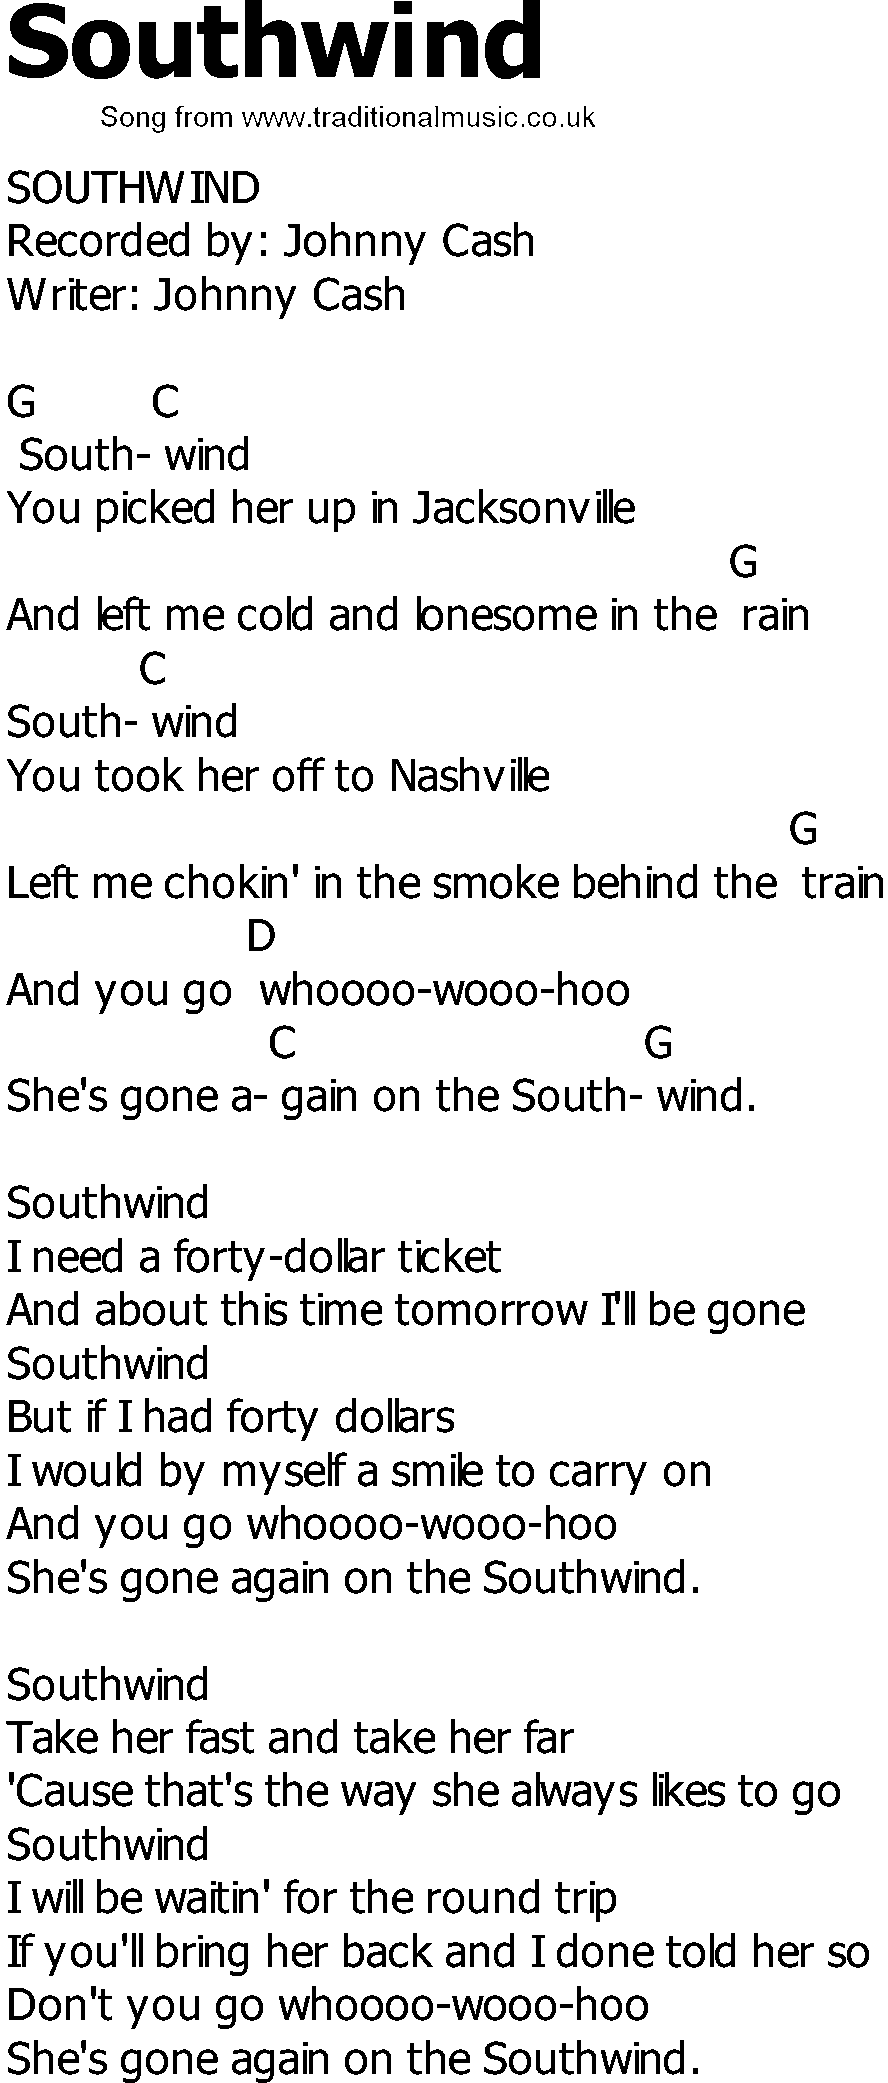 Old Country song lyrics with chords - Southwind